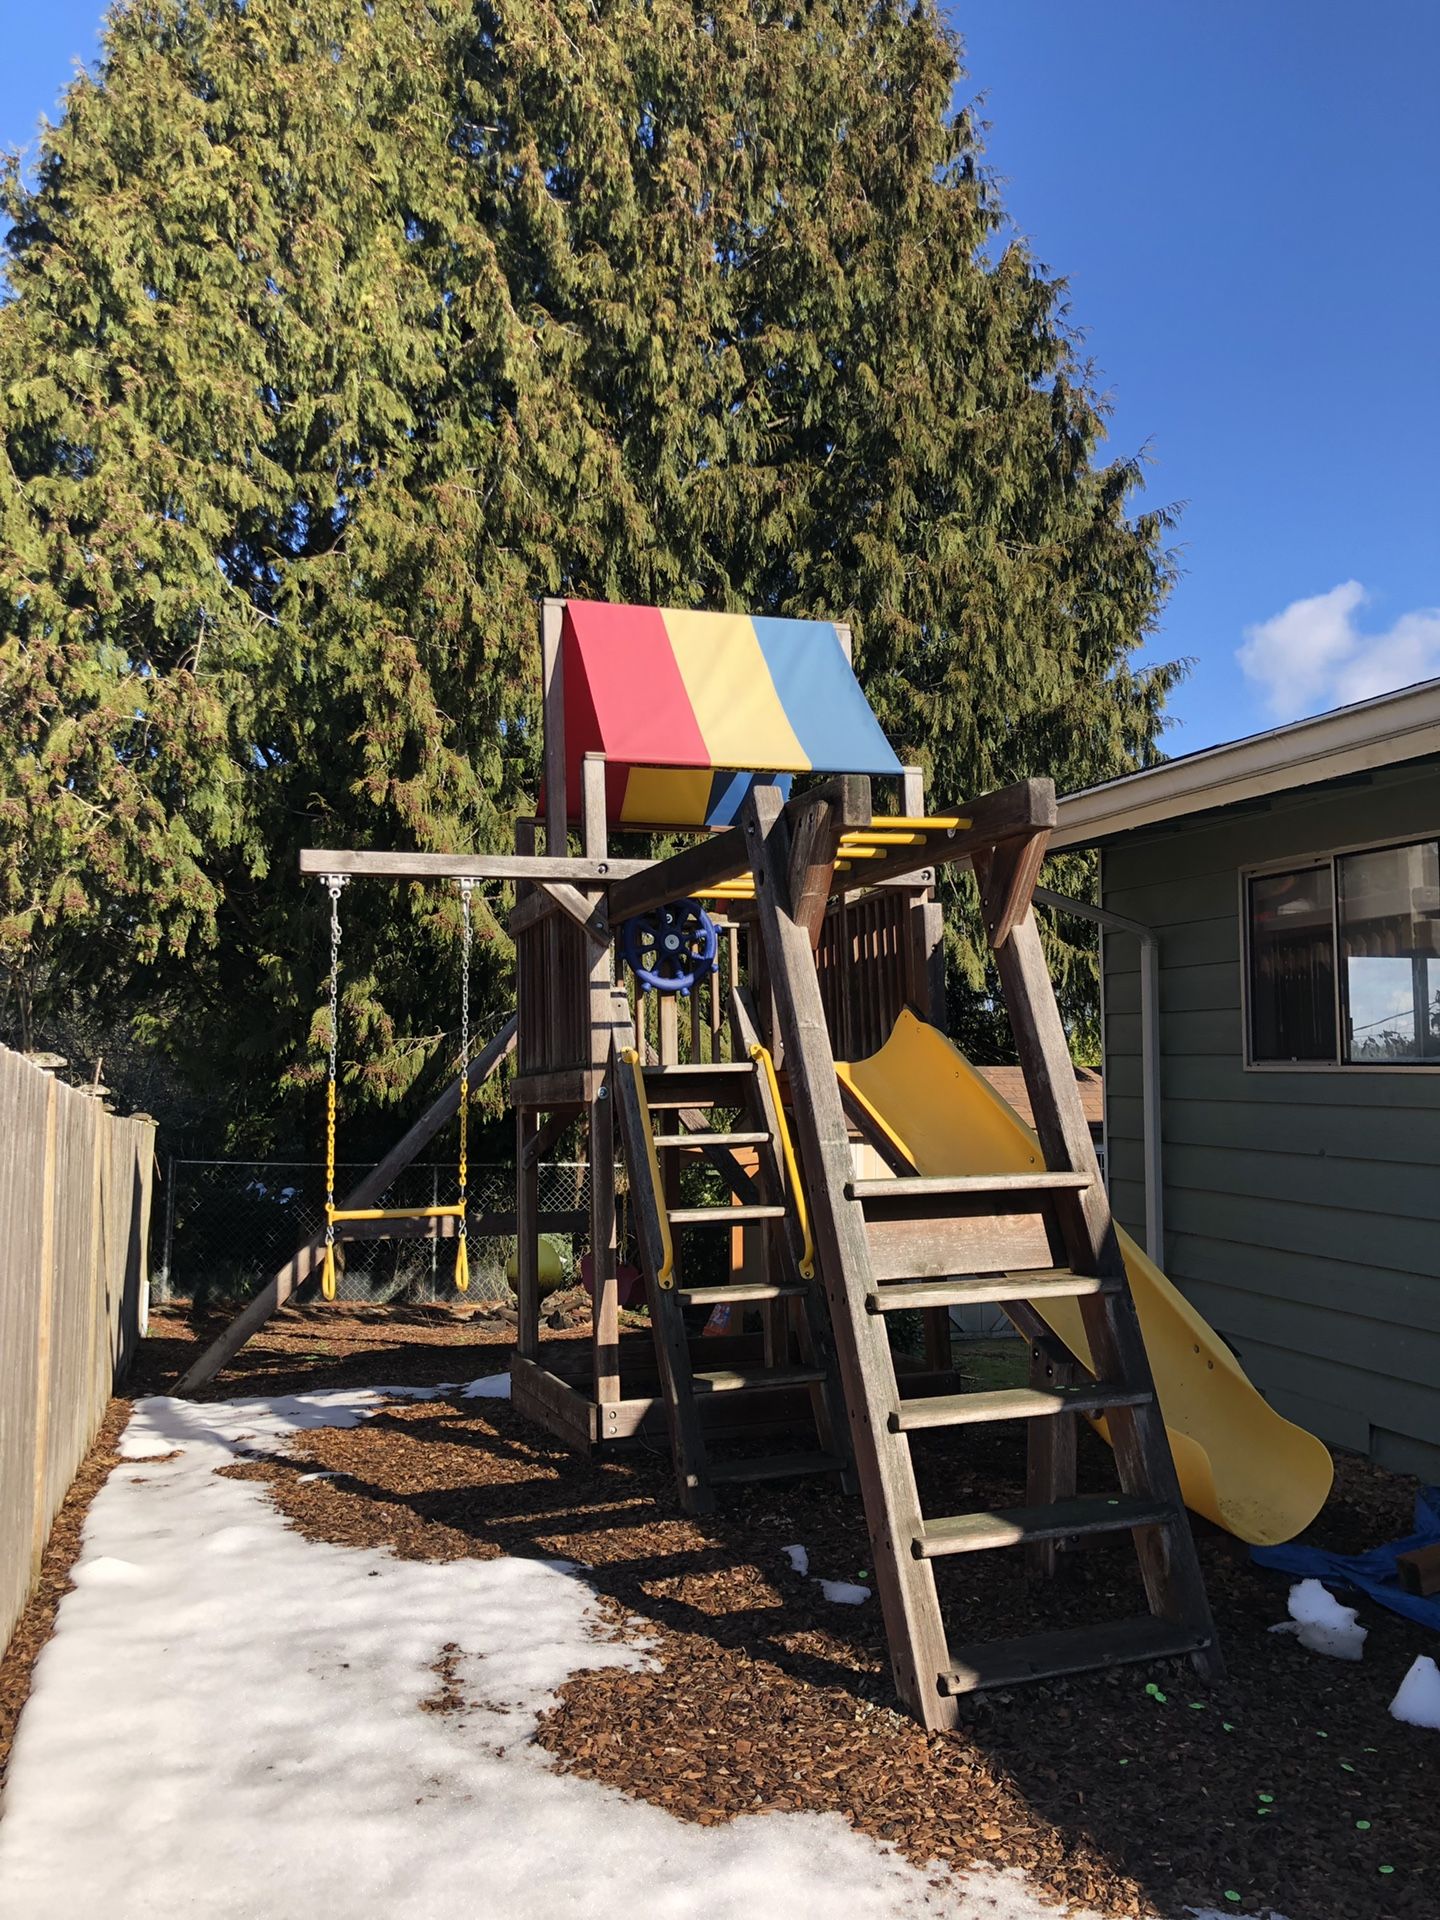 Rainbow Play Systems Play Structure, Wooden Swing Set